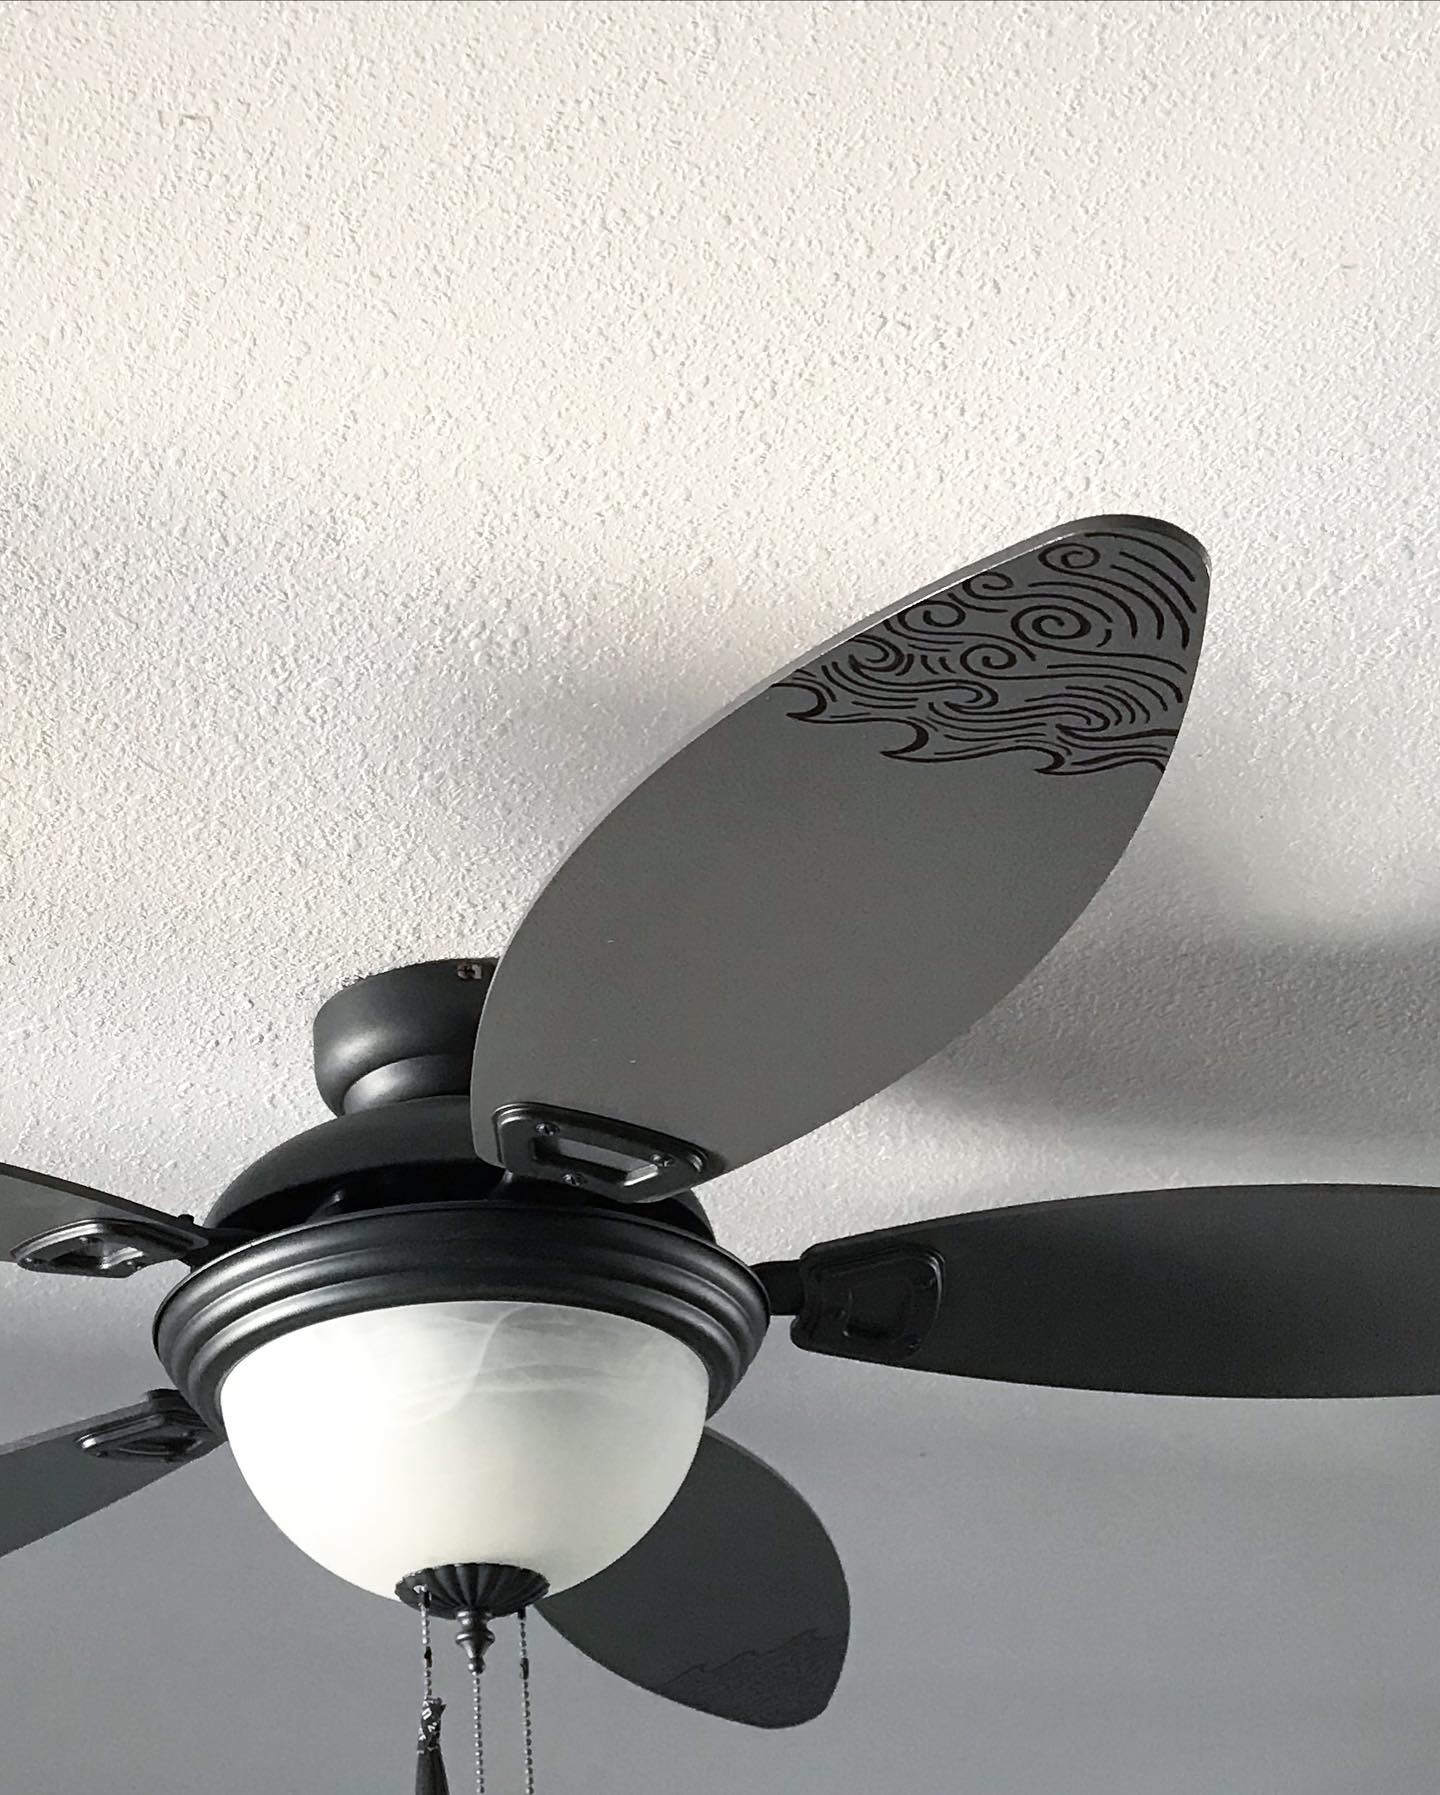 How to paint a ceiling fan